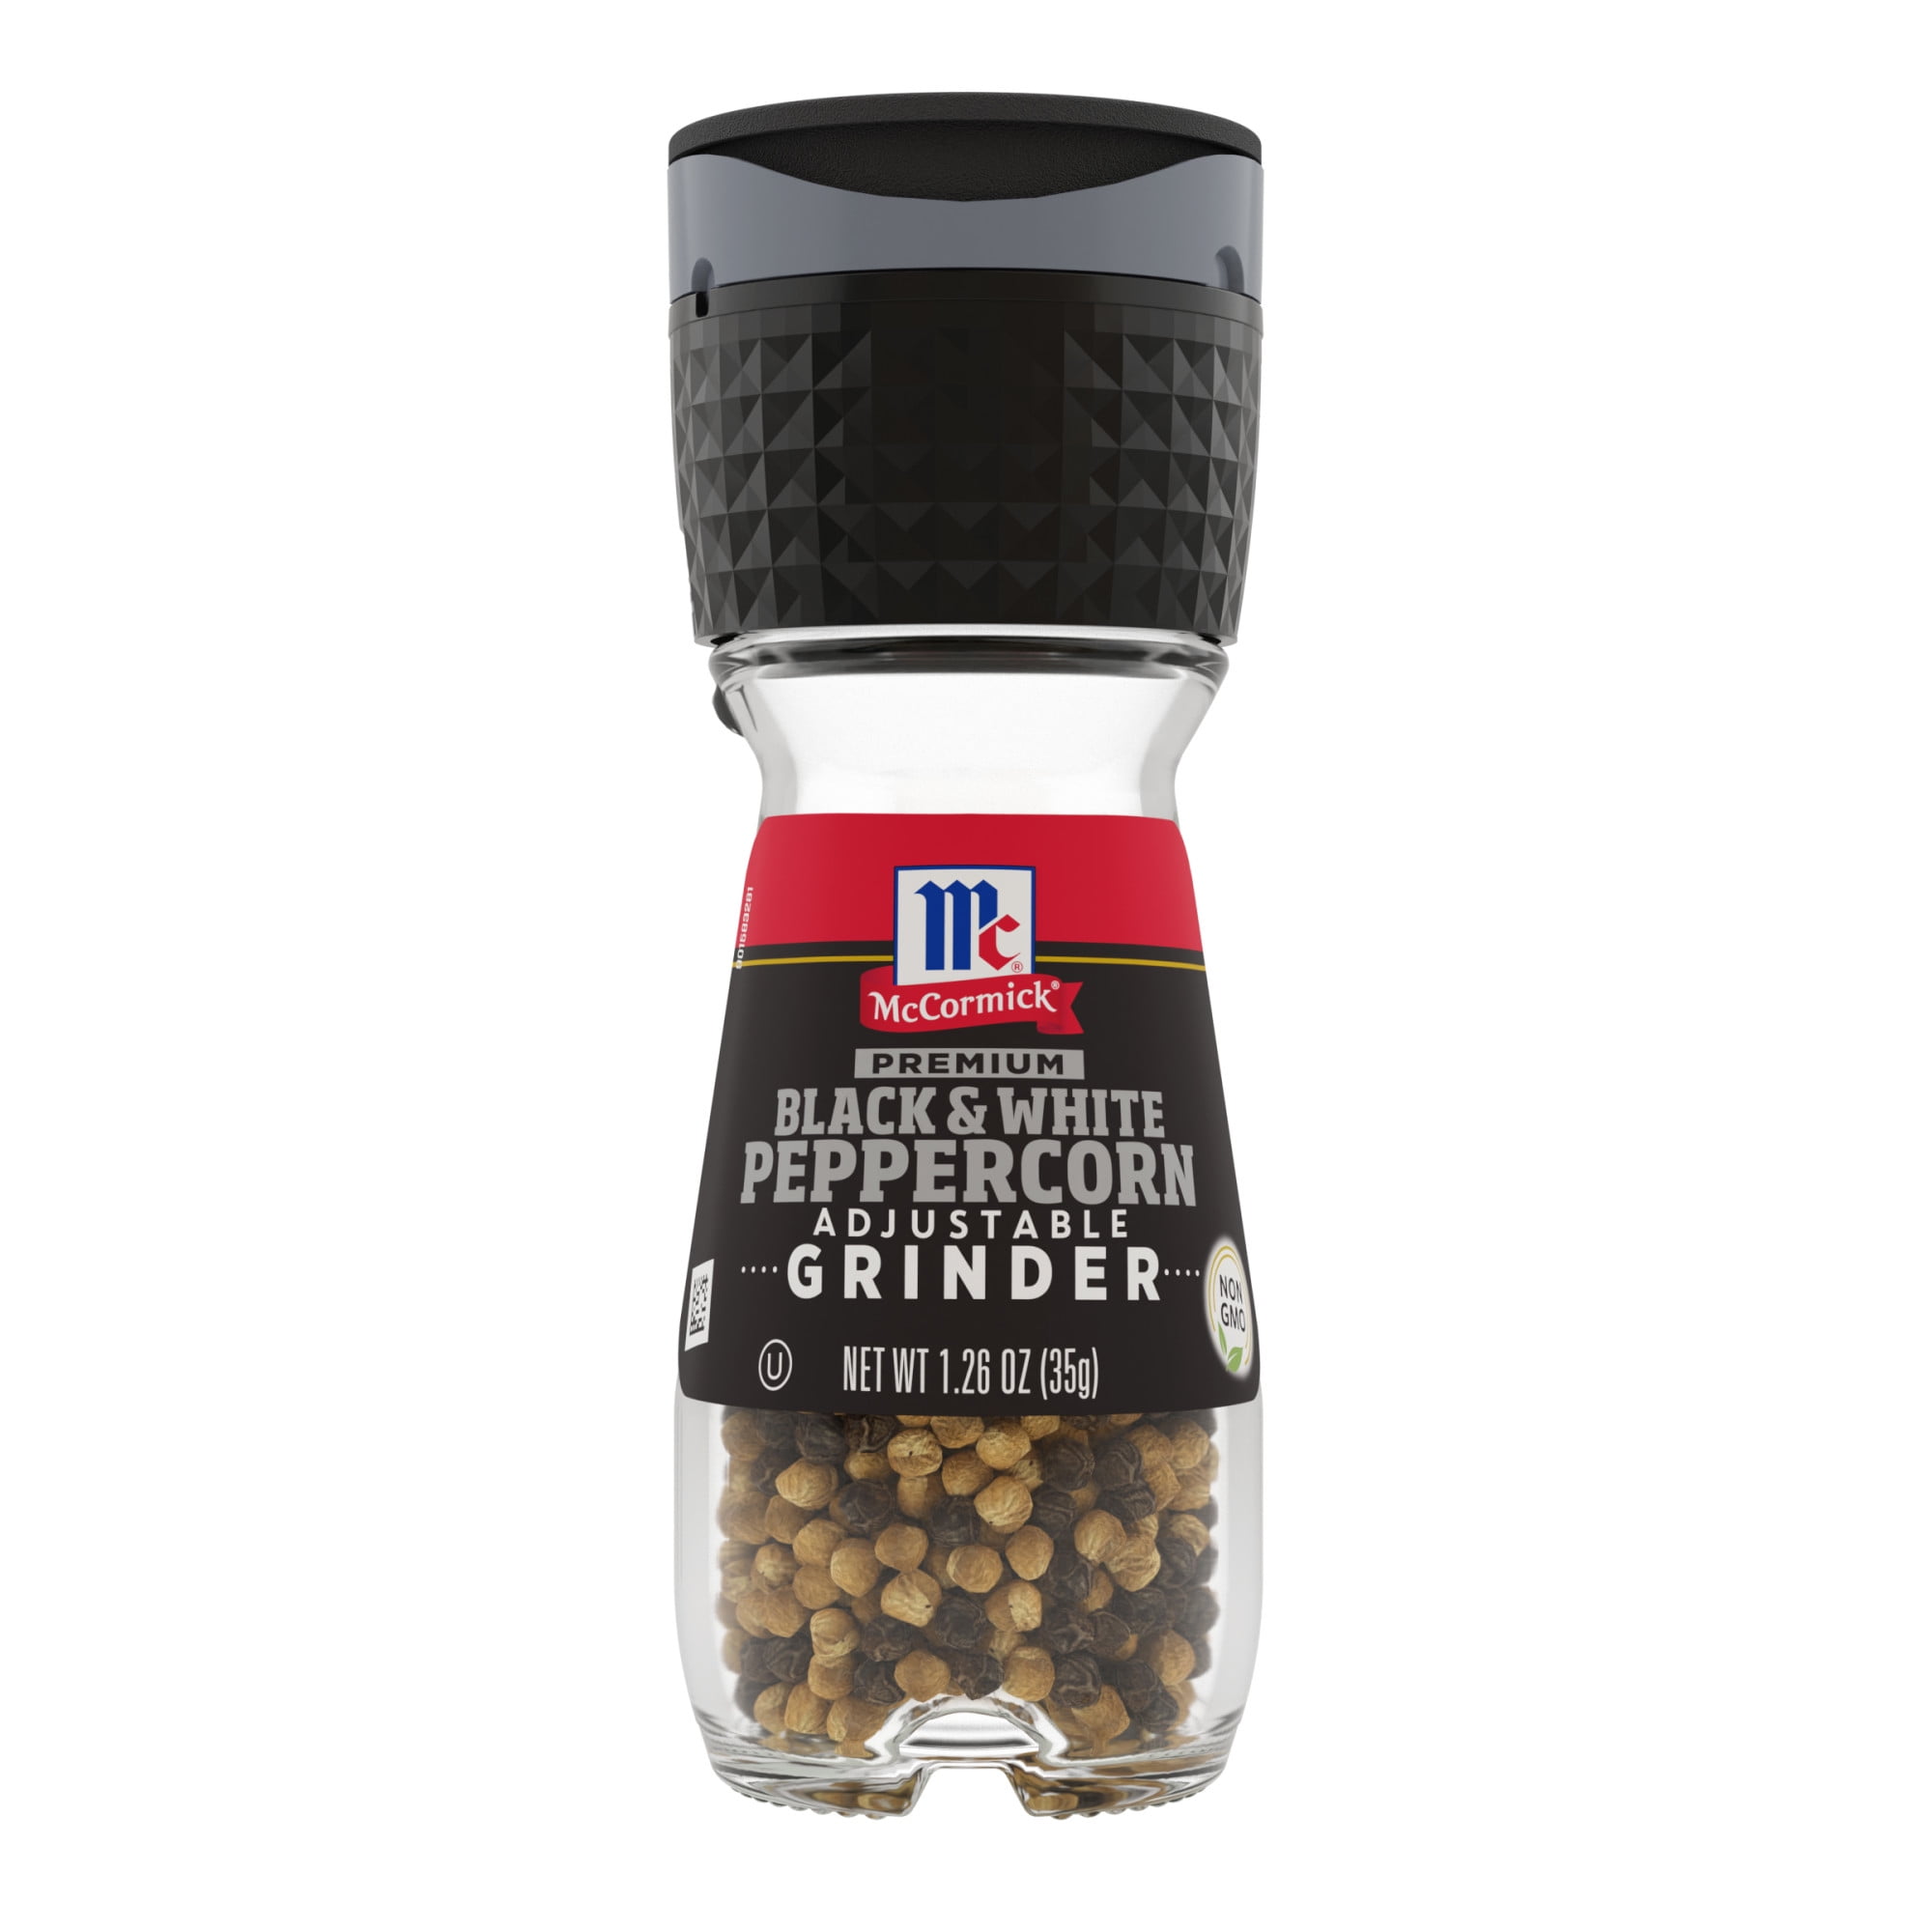 How to Open the McCormick Peppercorn Grinder in 1 Second